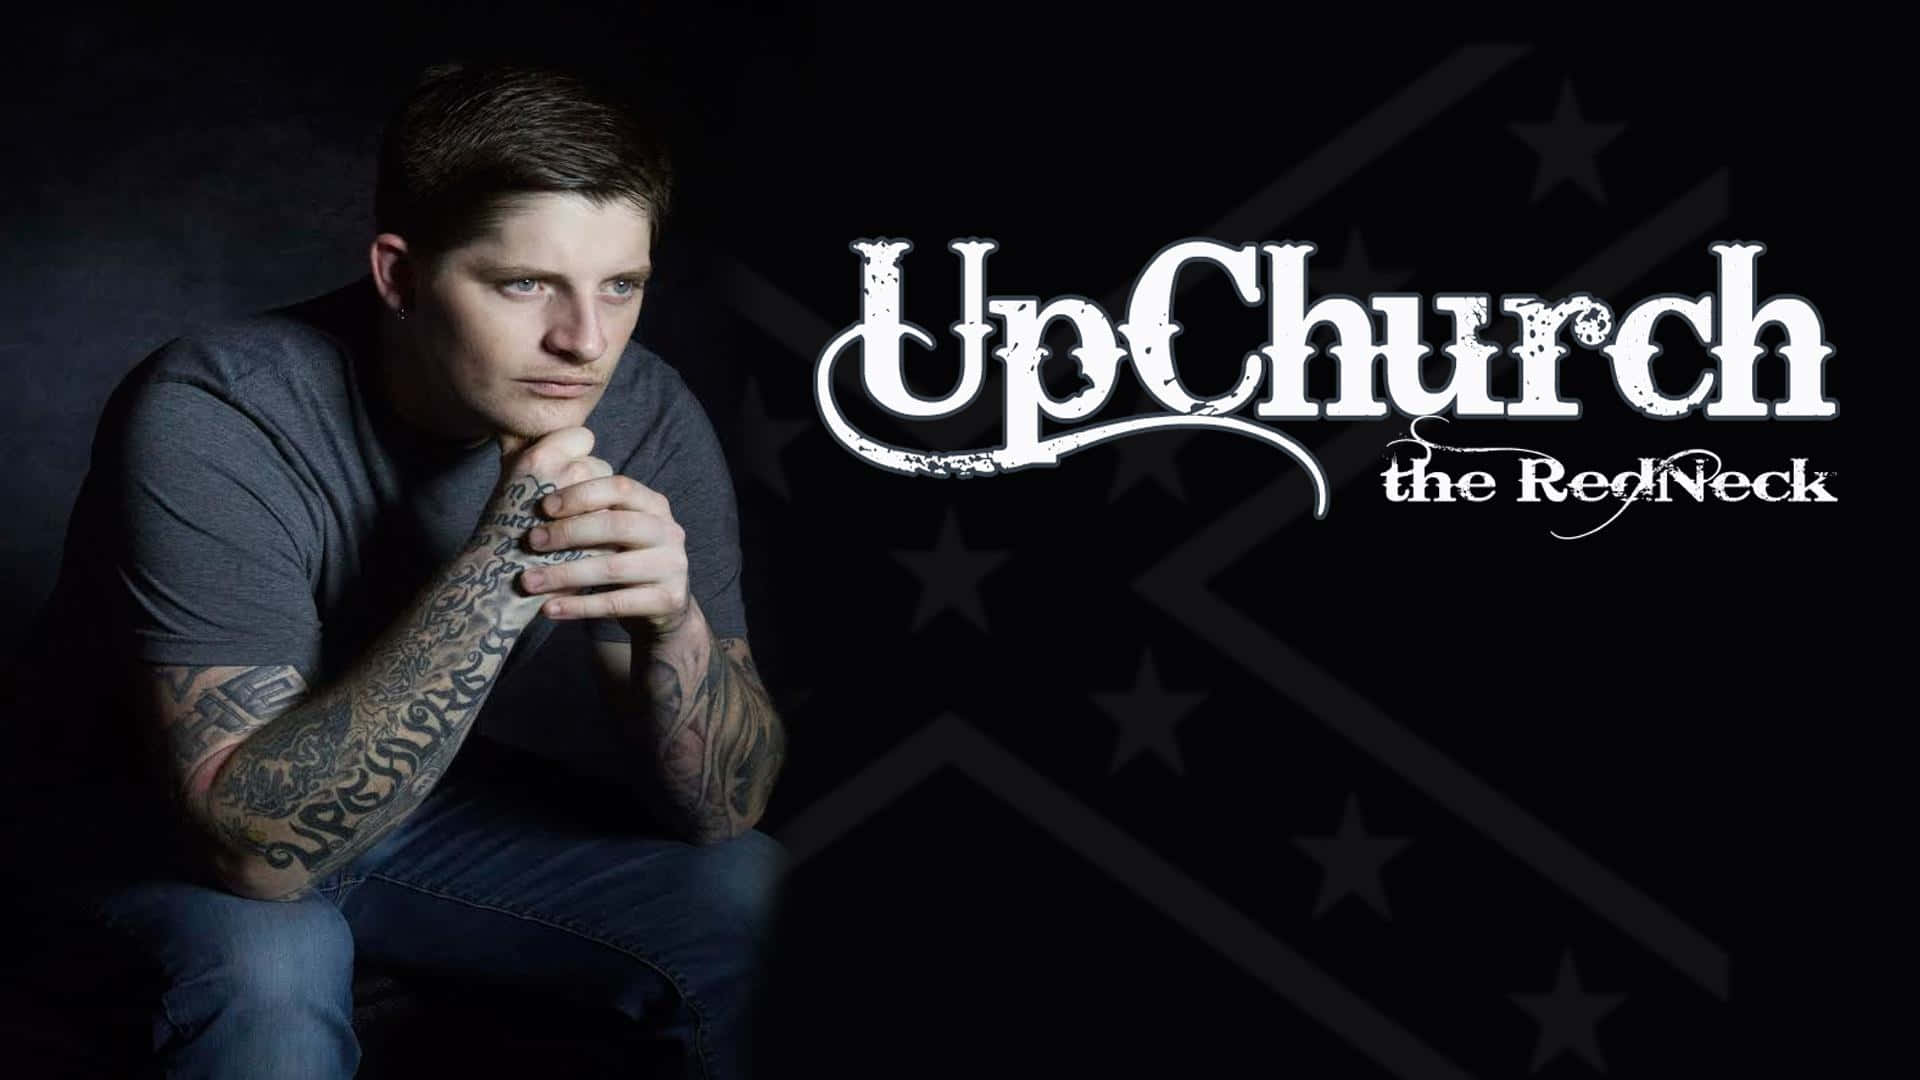 Upchurch The Redneck Promotional Photo Wallpaper